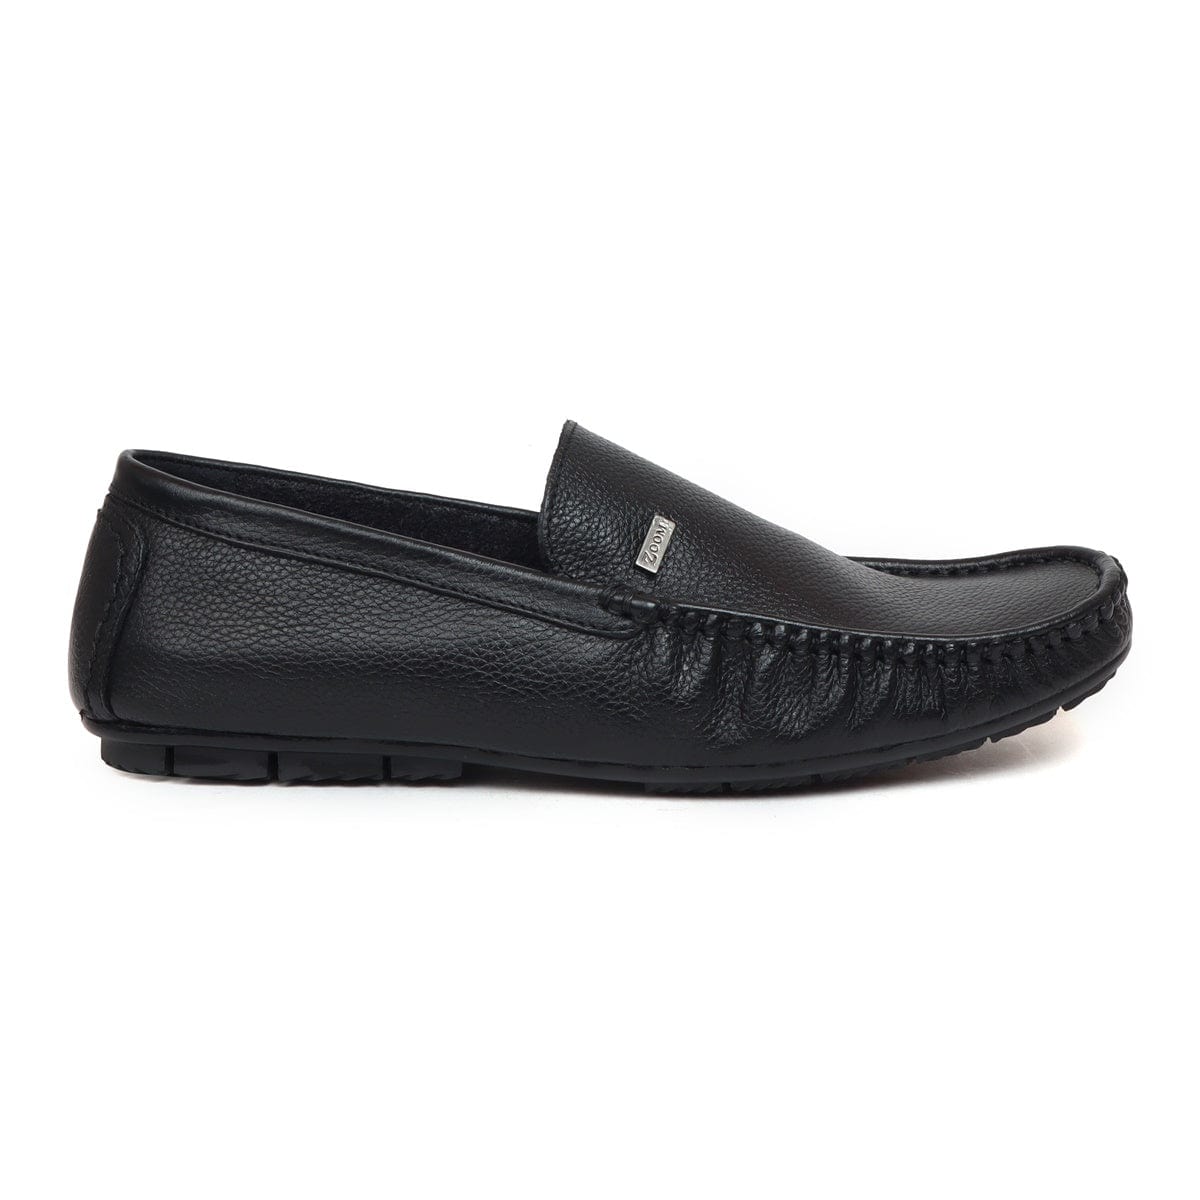 casual black loafers for men_ZS2